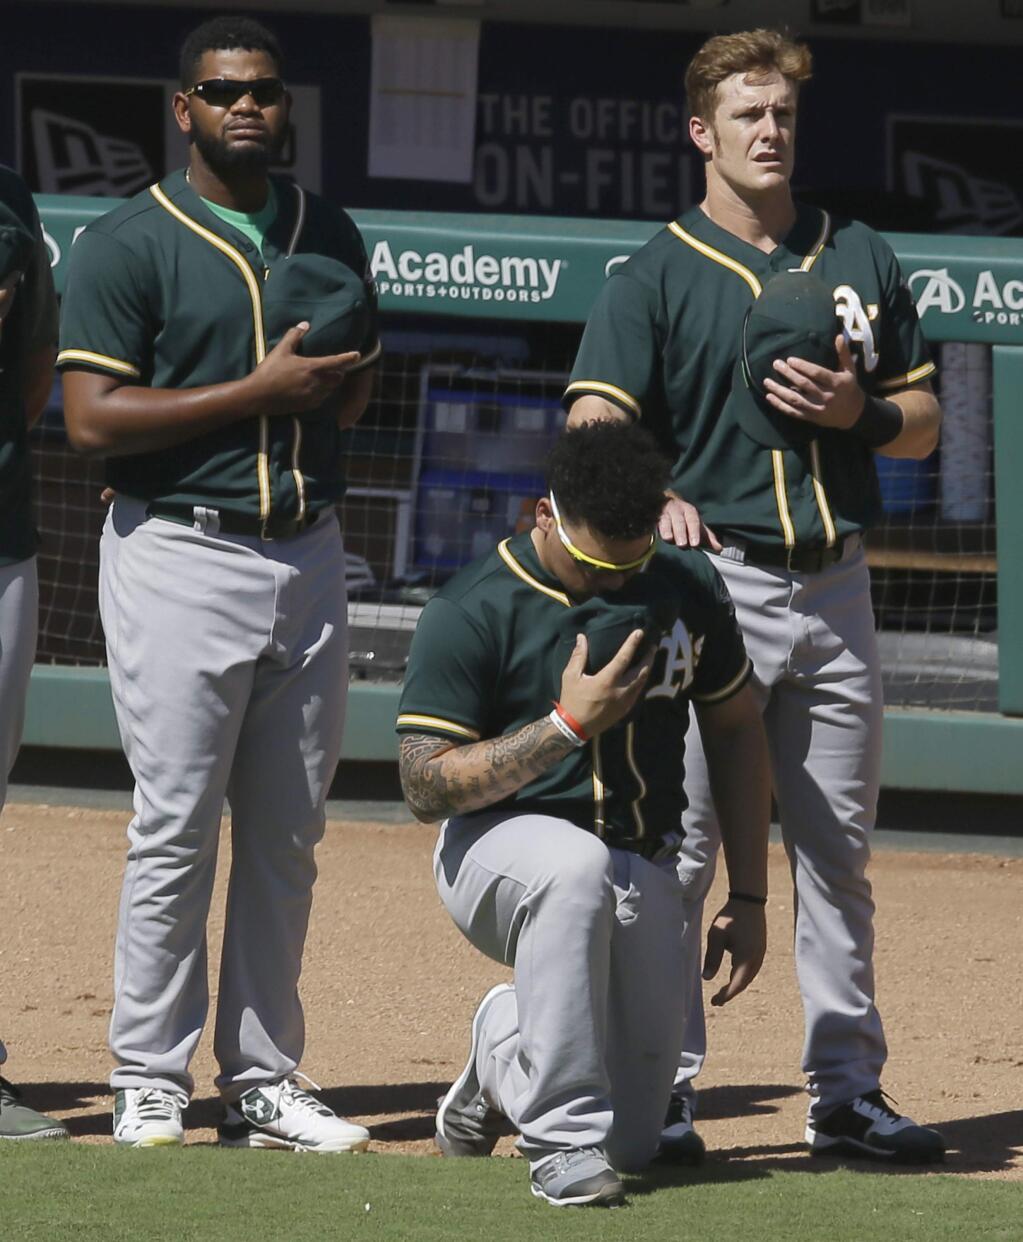 In this Sunday, Oct. 1, 2017 file photo, Oakland Athletics catcher Bruce Maxwell takes a knee during the national anthem next to teammates Mark Canha, right, and Raul Alcantara before a game against the Texas Rangers in Arlington, Texas. Oakland Athletics catcher Bruce Maxwell says he will no longer kneel for the national anthem as he did last season as a rookie, when he became the first major leaguer to do so following the lead of many NFL players. He spoke Tuesday, Feb. 13, 2018 as the A's pitchers and catchers reported to spring training. (AP Photo/LM Otero, File)